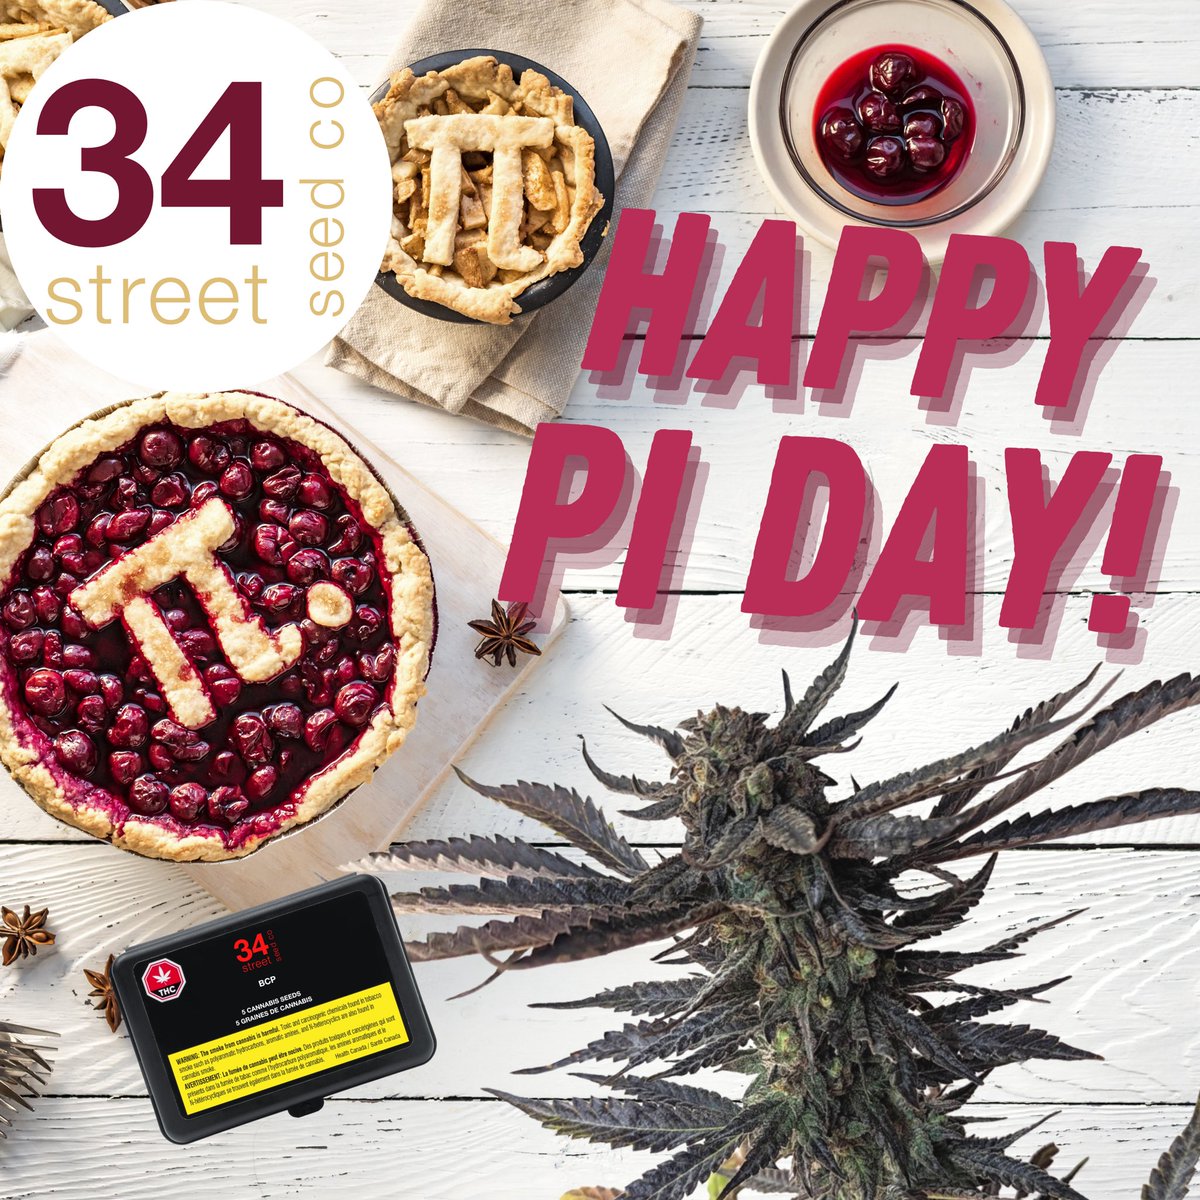 Happy Pi Day Growmies! Do you ever turn any of your grows into edibles? If so what’s your favourite dish to bake up in smoke?